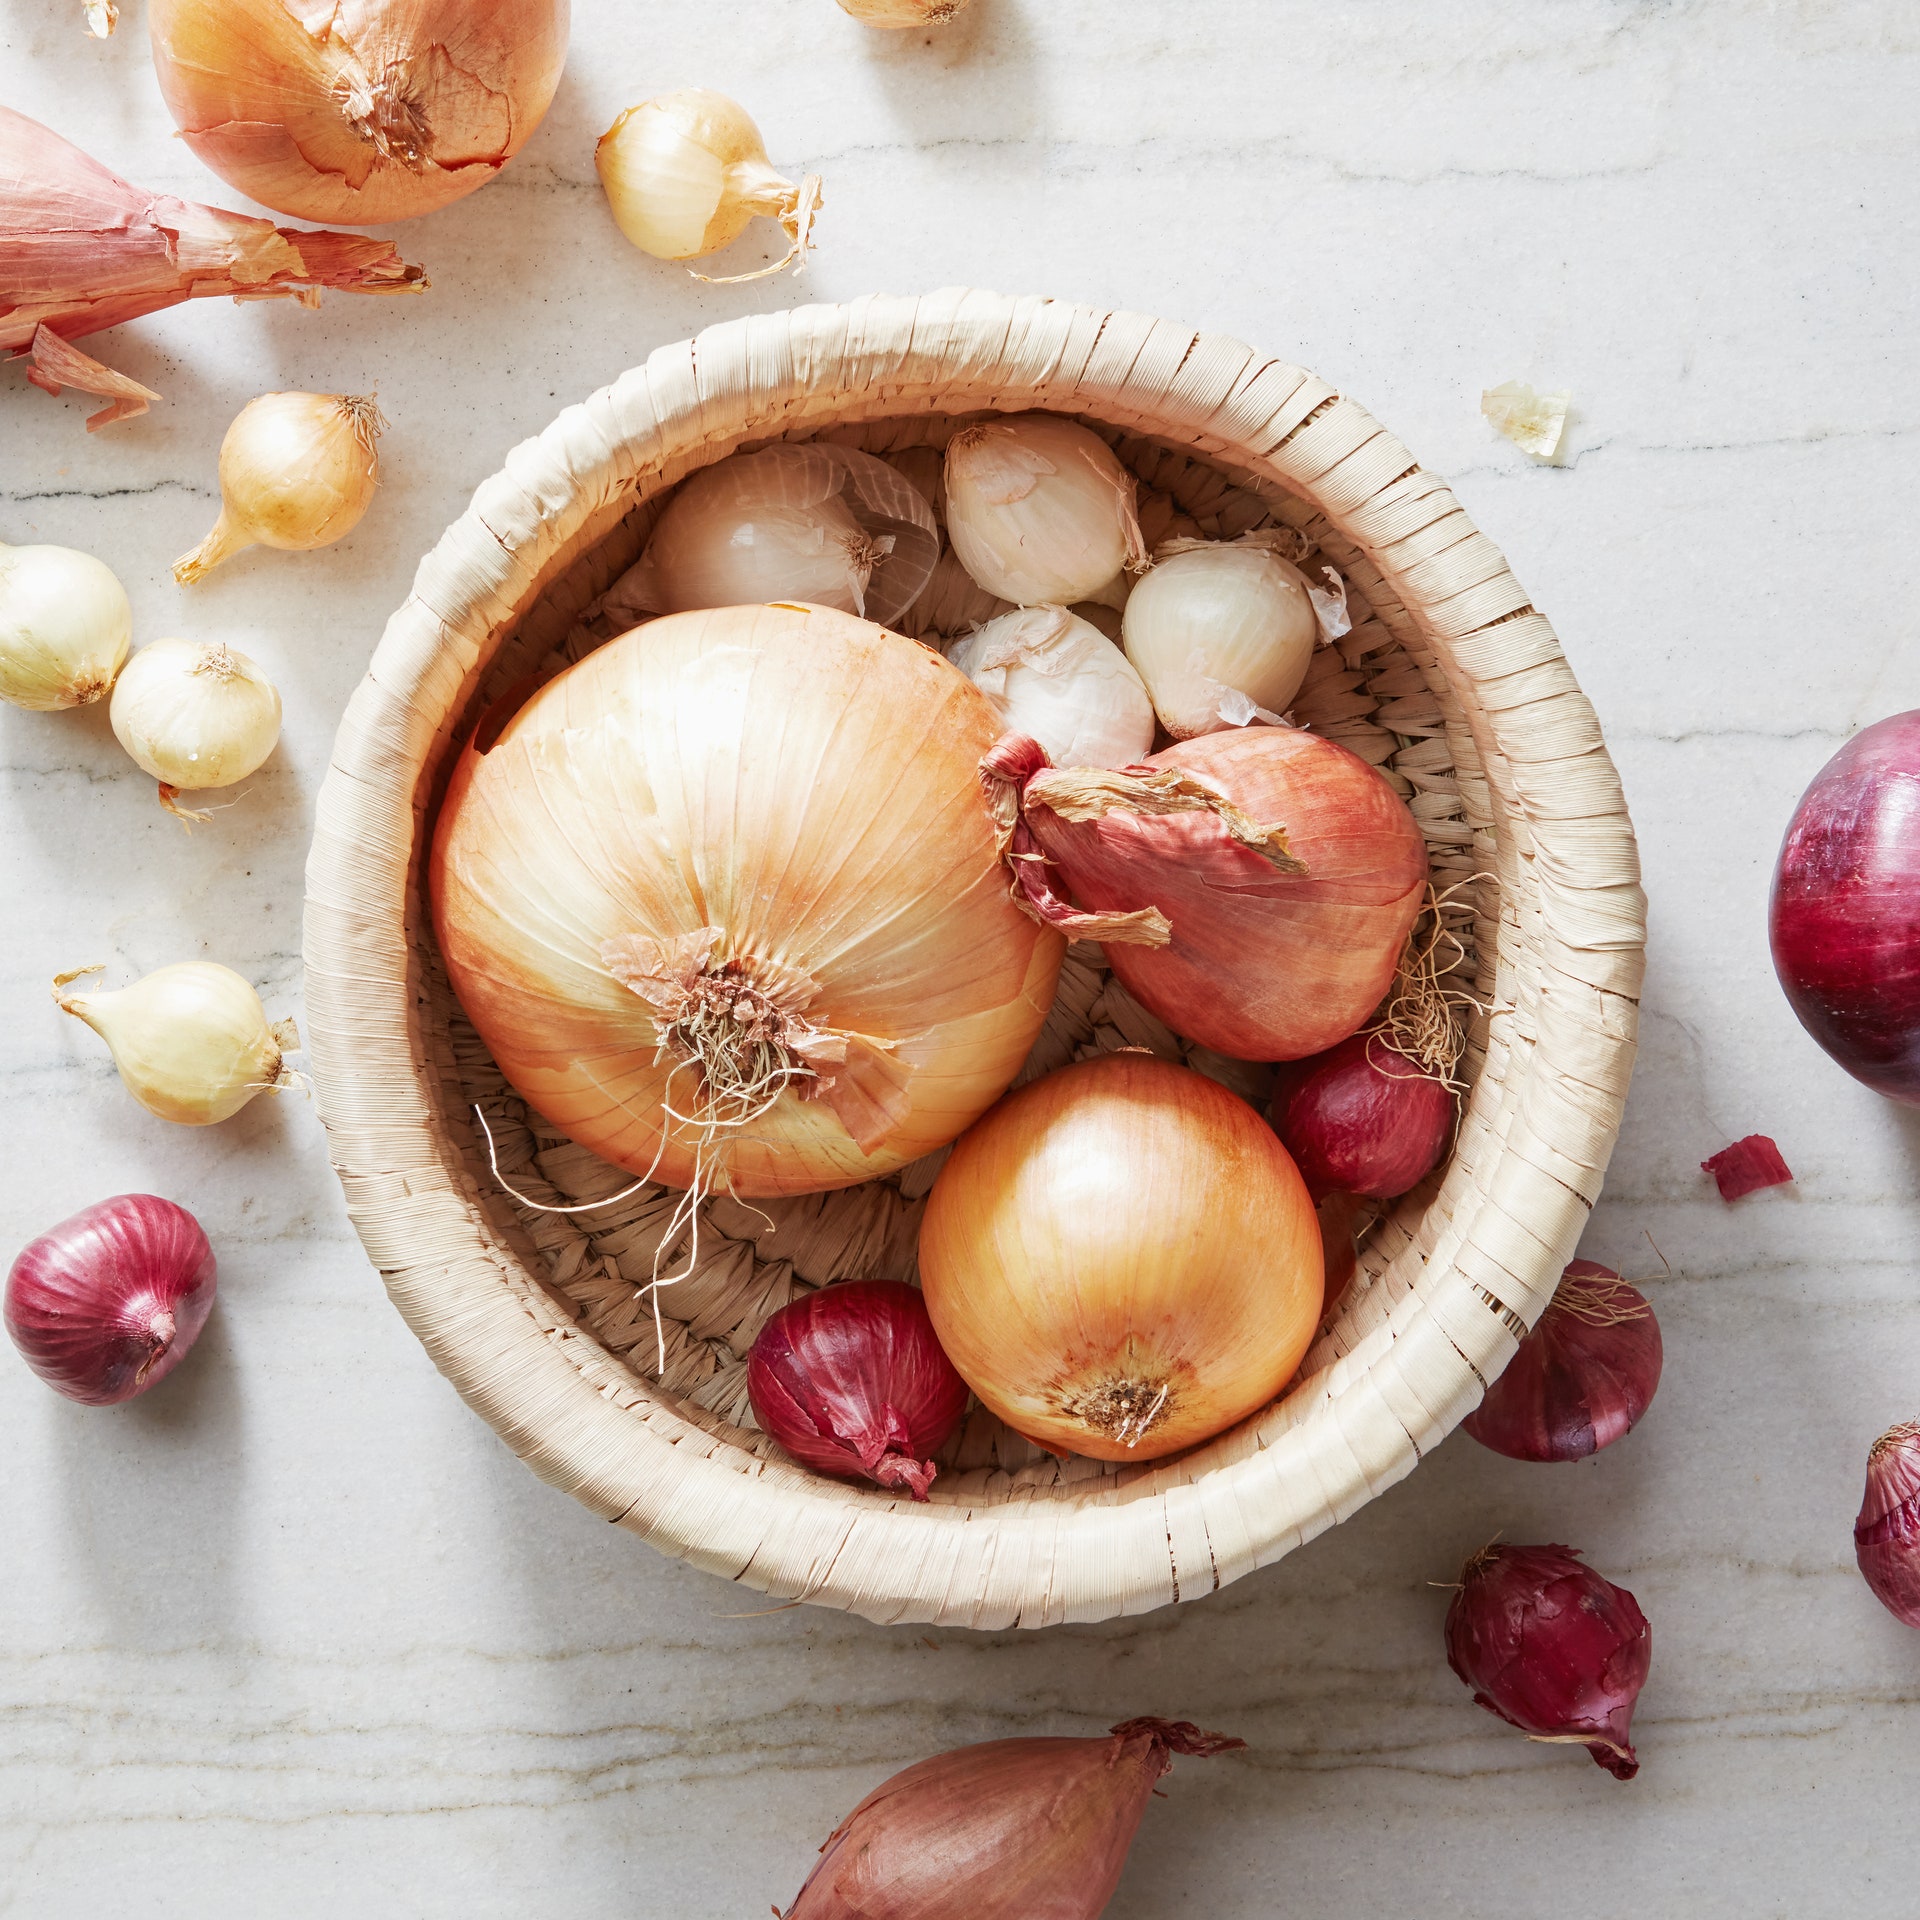 A variety of onions in a basket and on a countertop.